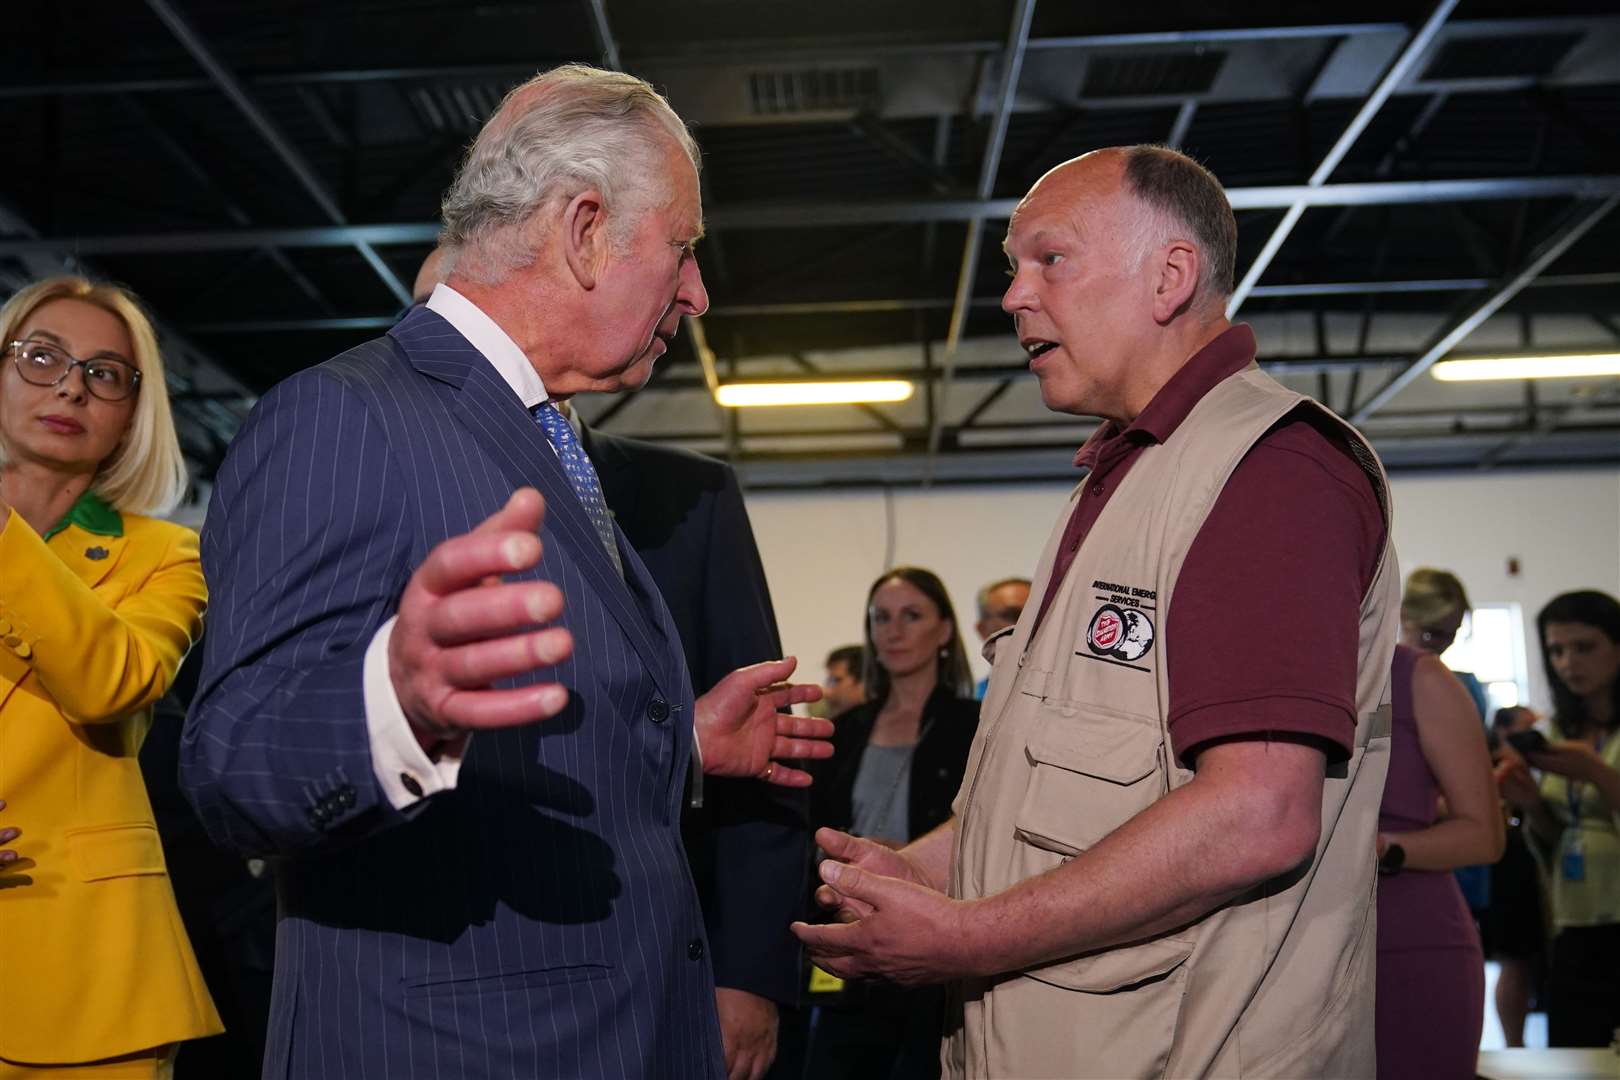 Charles meeting Salvation Army Major Stephen Noble during his visit to the distribution centre (Yui Mok/PA)